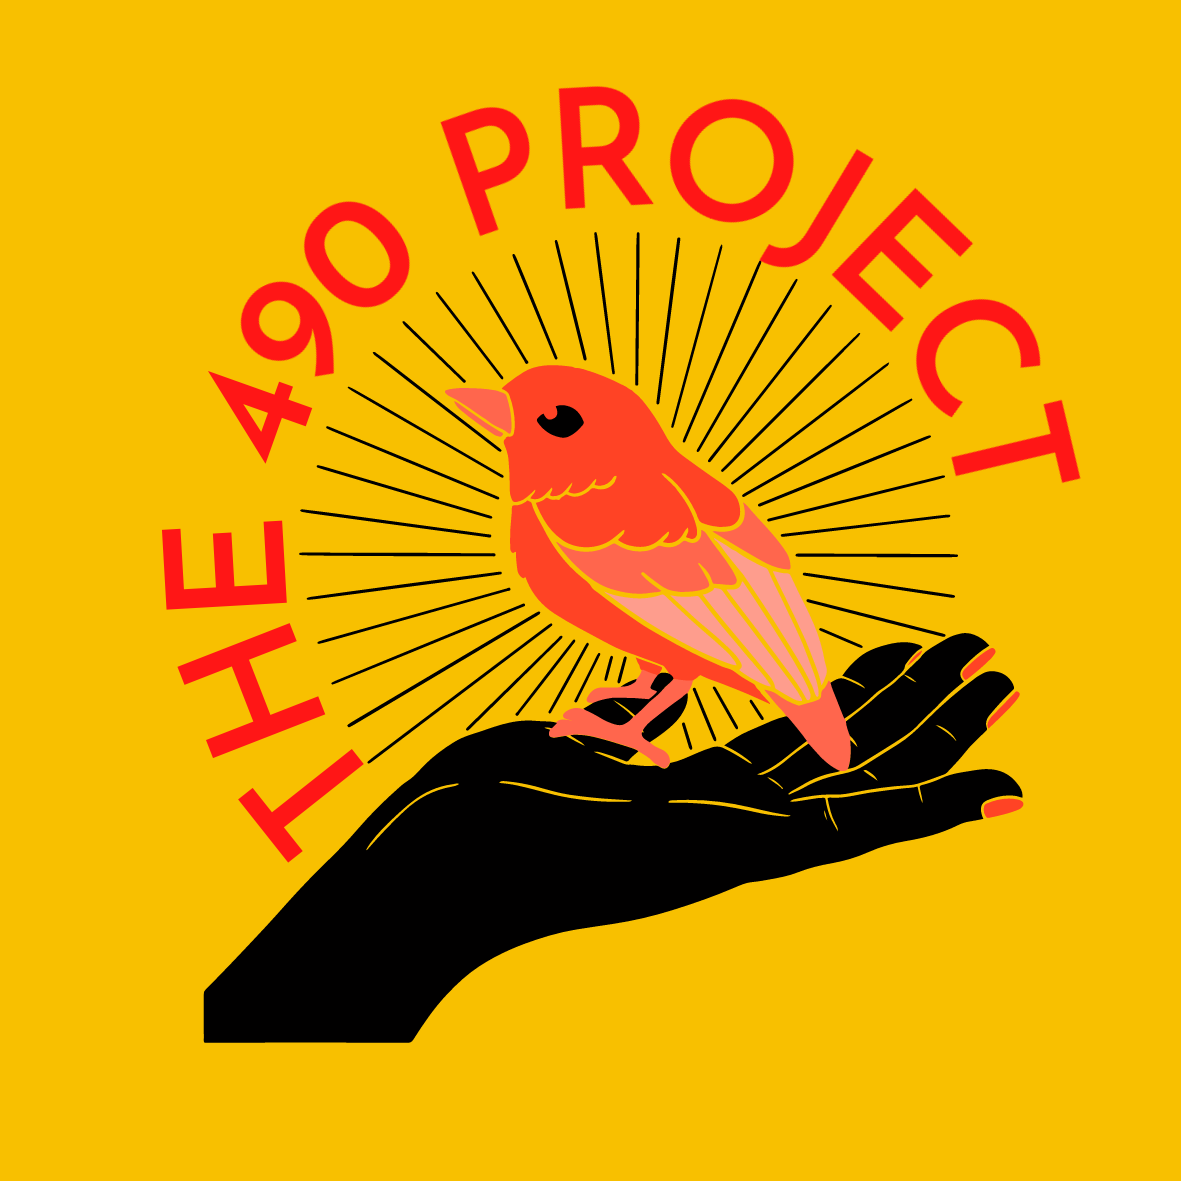 The 490 Project in Louisville logo